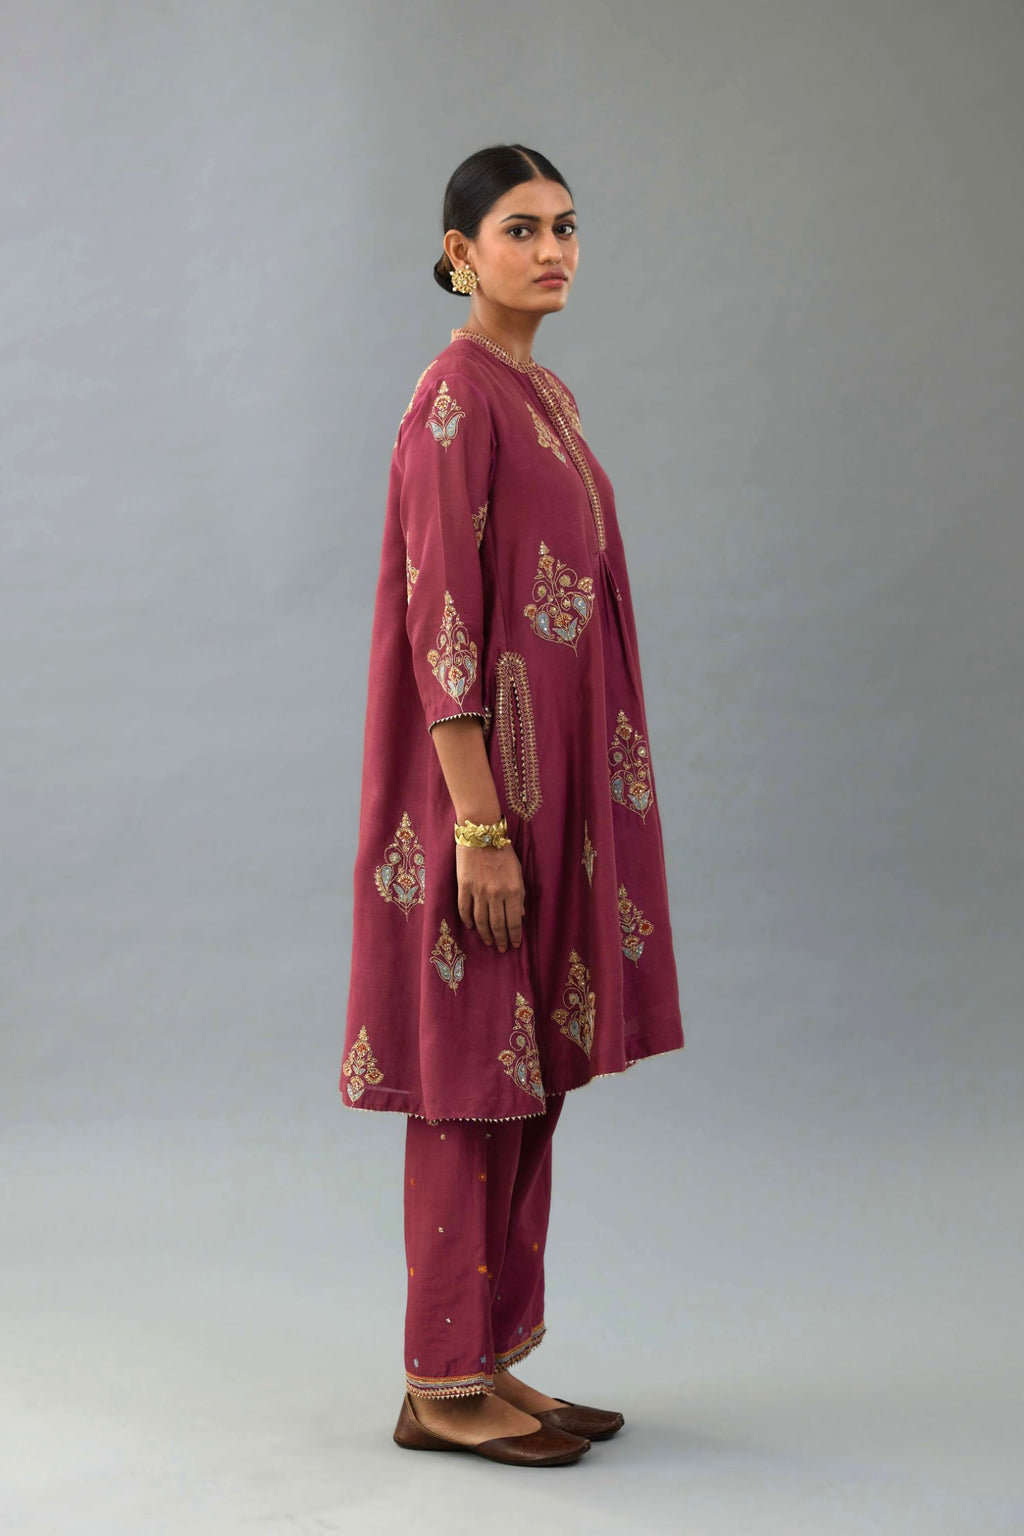 Wine Silk Chanderi short kurta set with collar and front placket, detailed with delicate gold embroidery is done around the placket and collar.